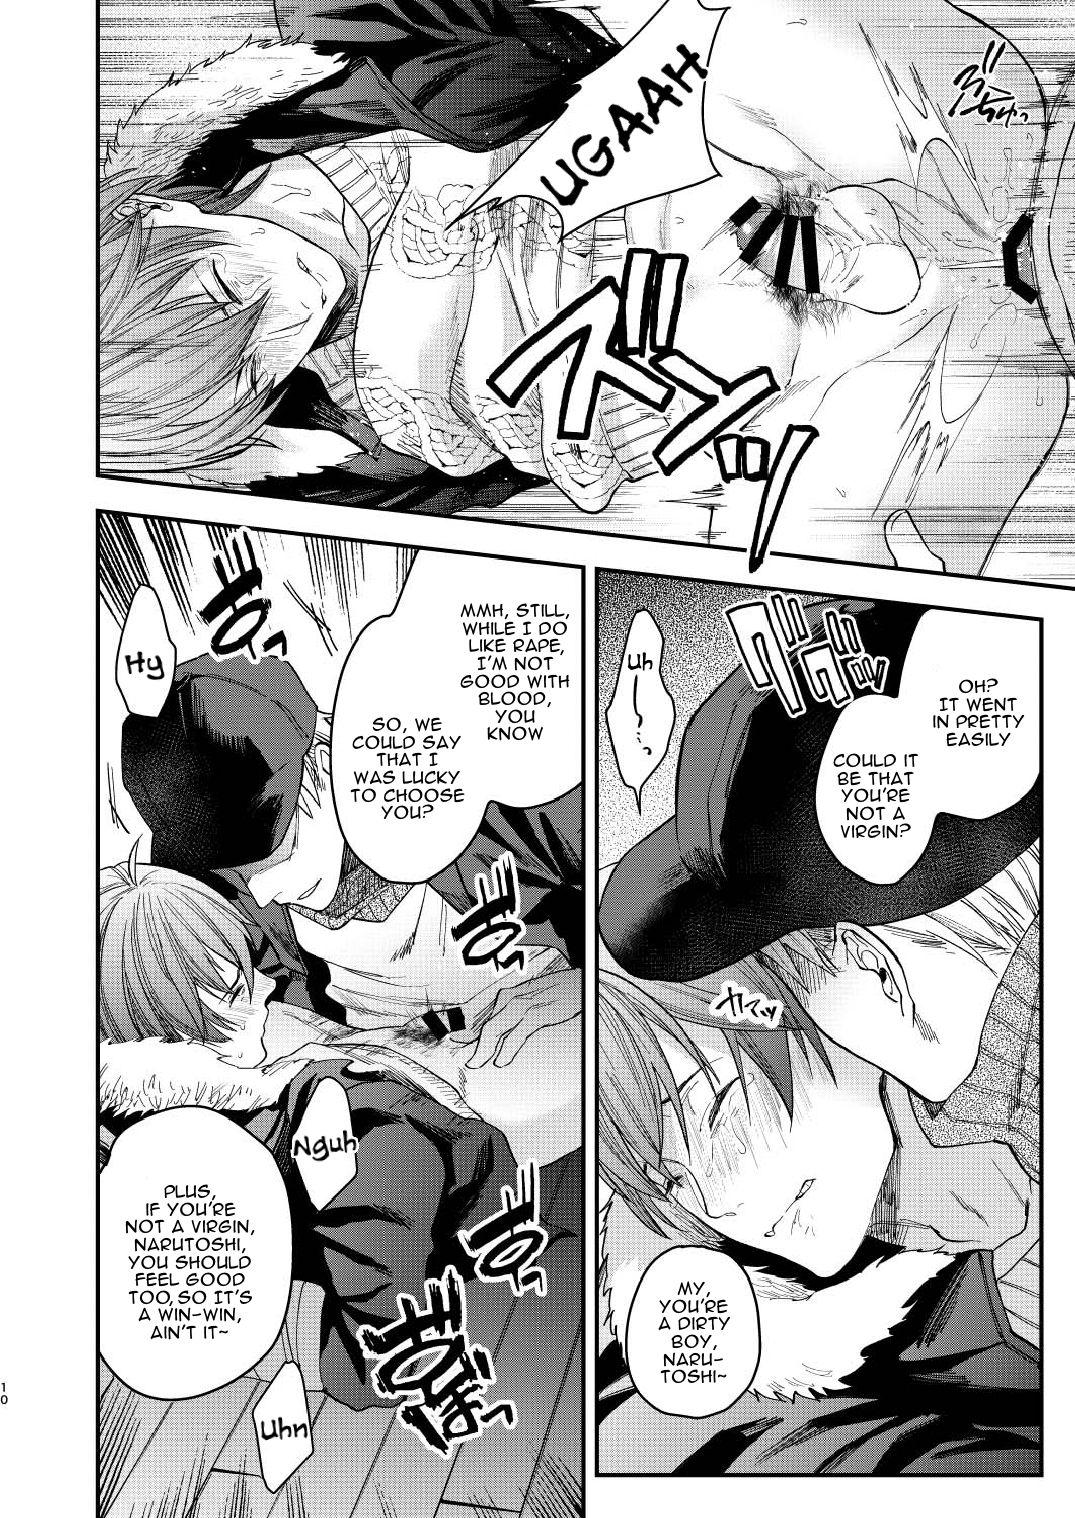 Groping Souyuu Ganbou no Hanashi | A Story About That Kind of Desire - Original Cocksucking - Page 8